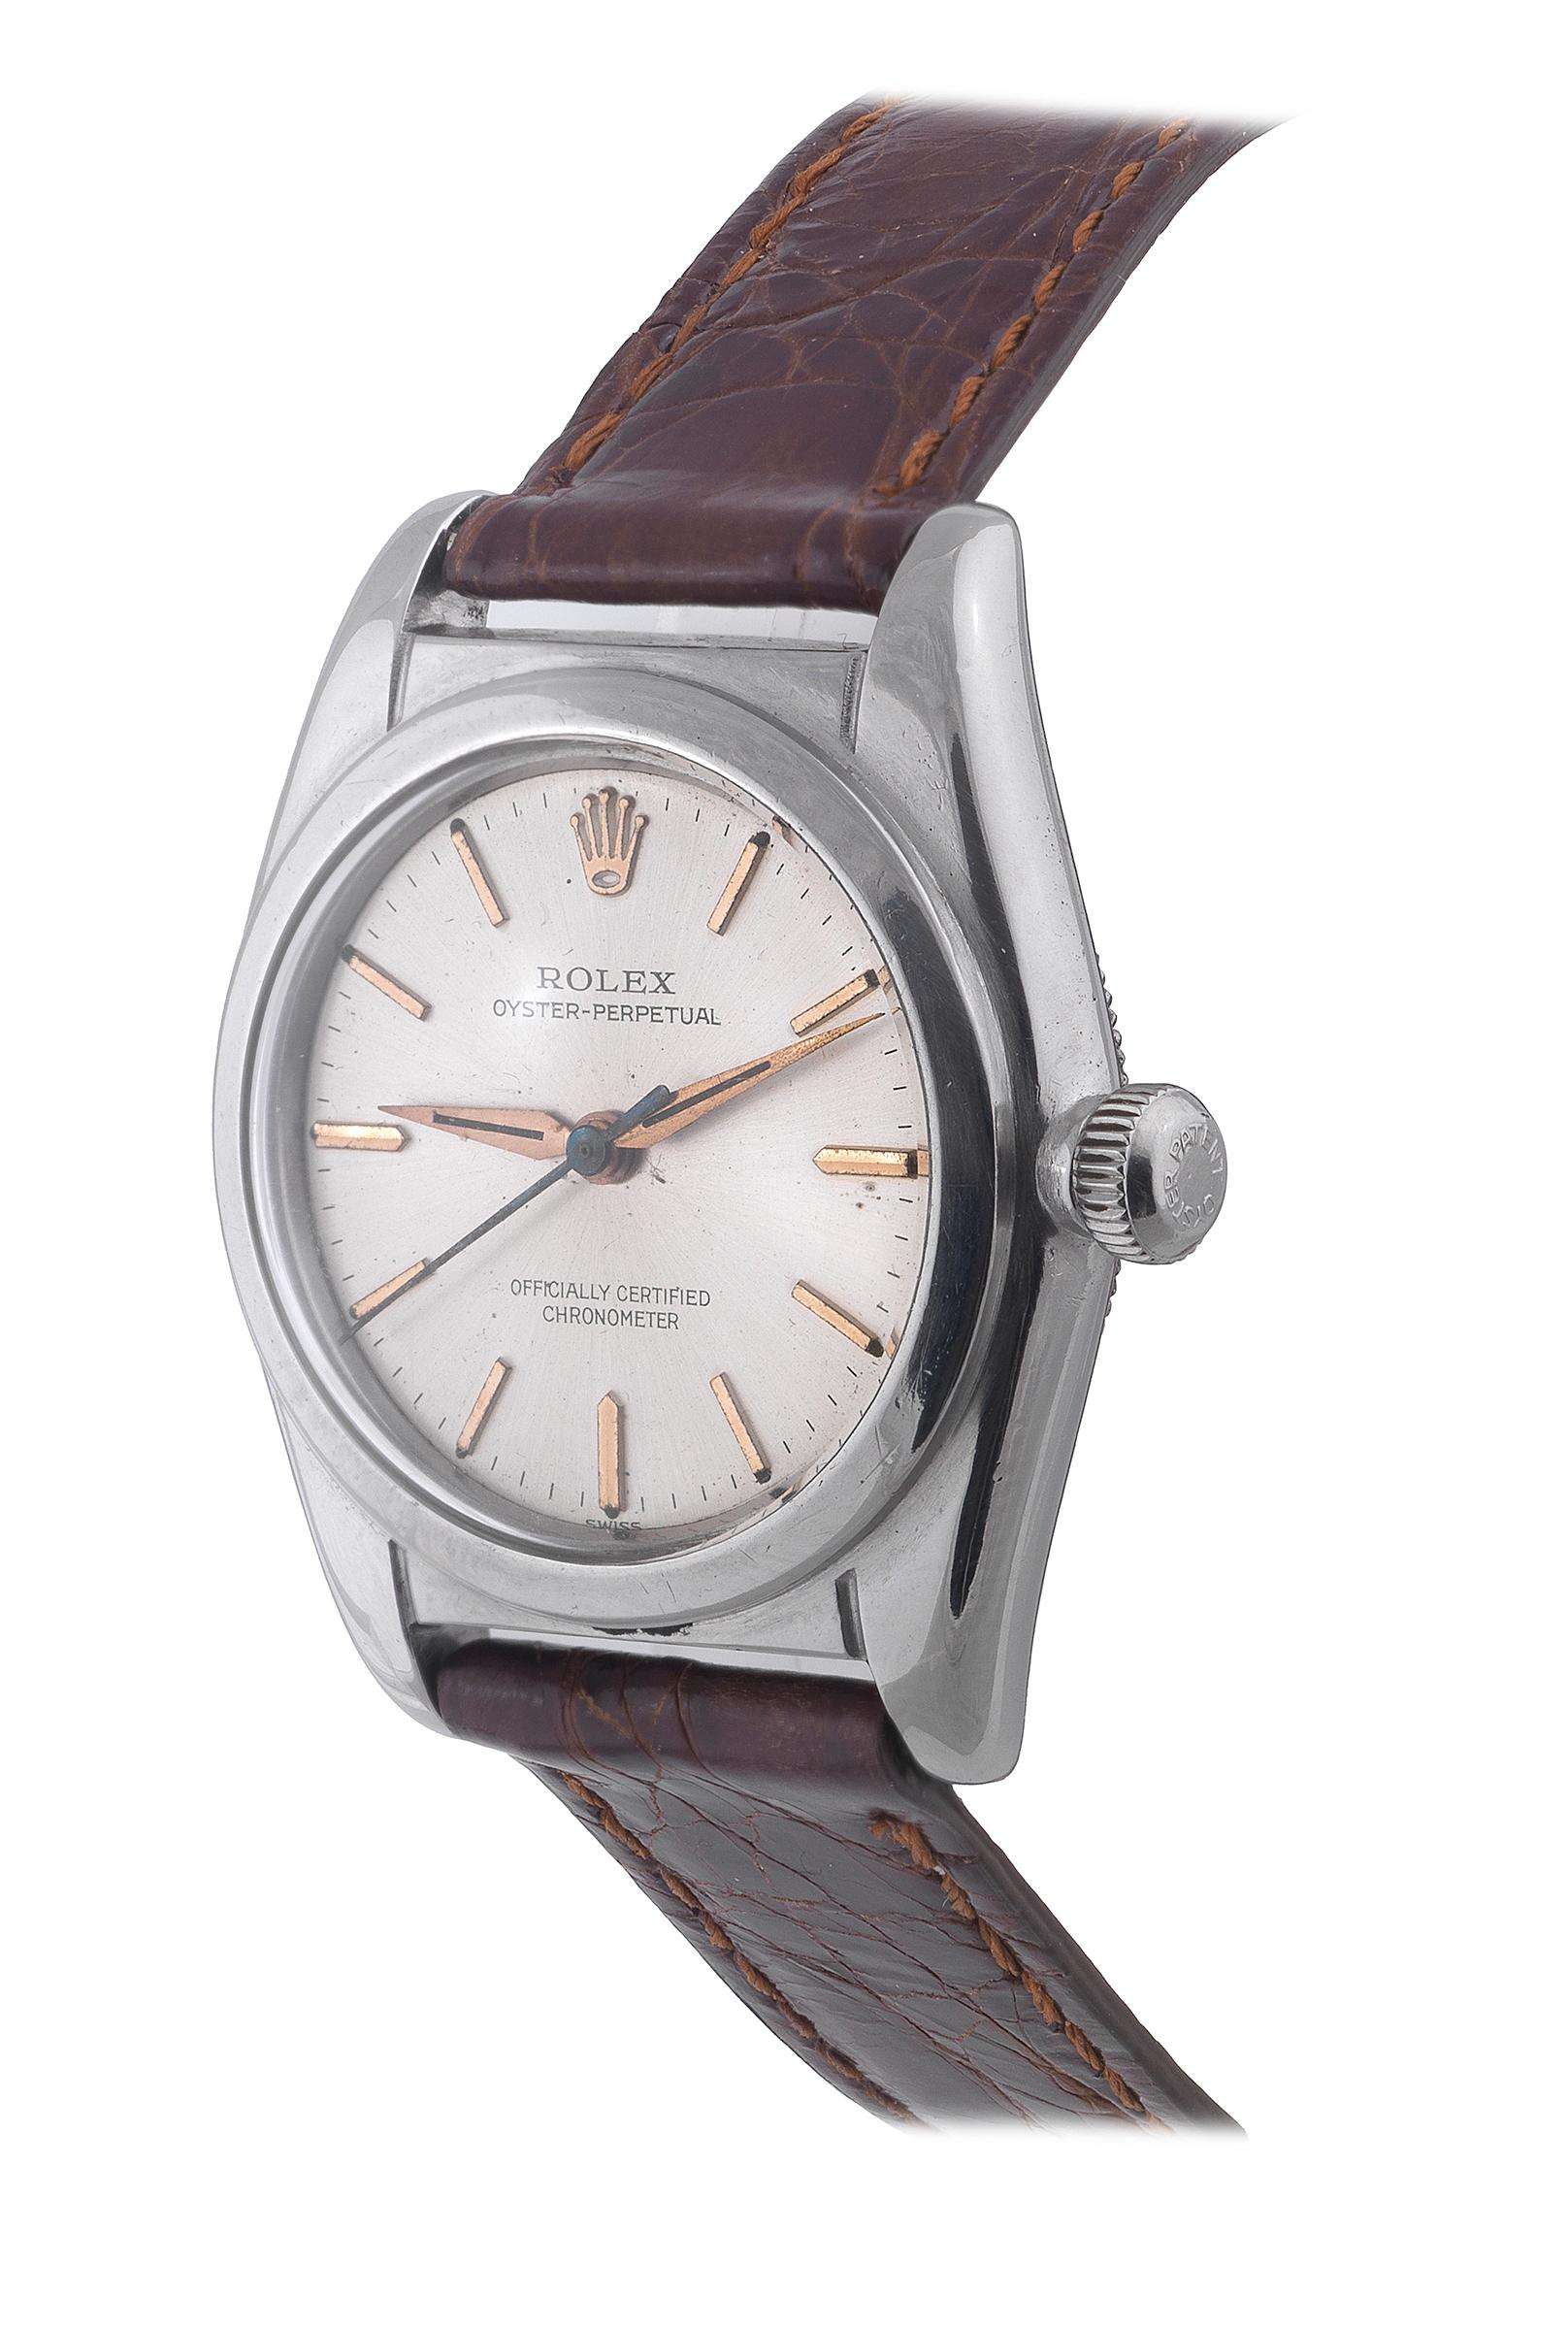 BERNARDO ANTICHITÀ PONTE VECCHIO FLORENCE 

Made in the 1940s. Fine, tonneau-shaped, center seconds, self-winding, waterresistant, stainless steel wristwatch.
Case two-body, polished and brushed, screwed-down case back and crown, polished inclined